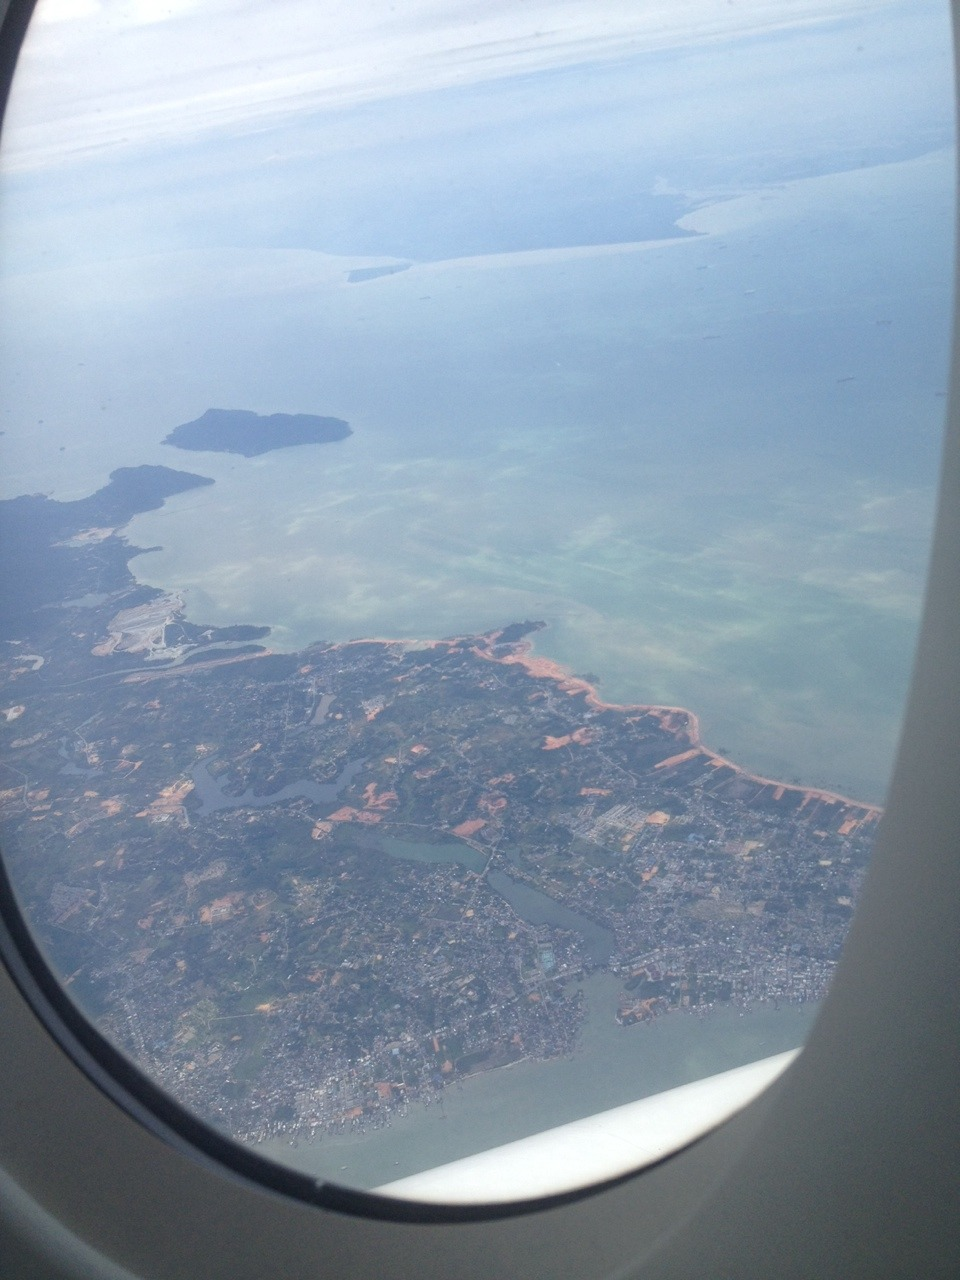 Singapore from the airplane. Jun 19th, 2014